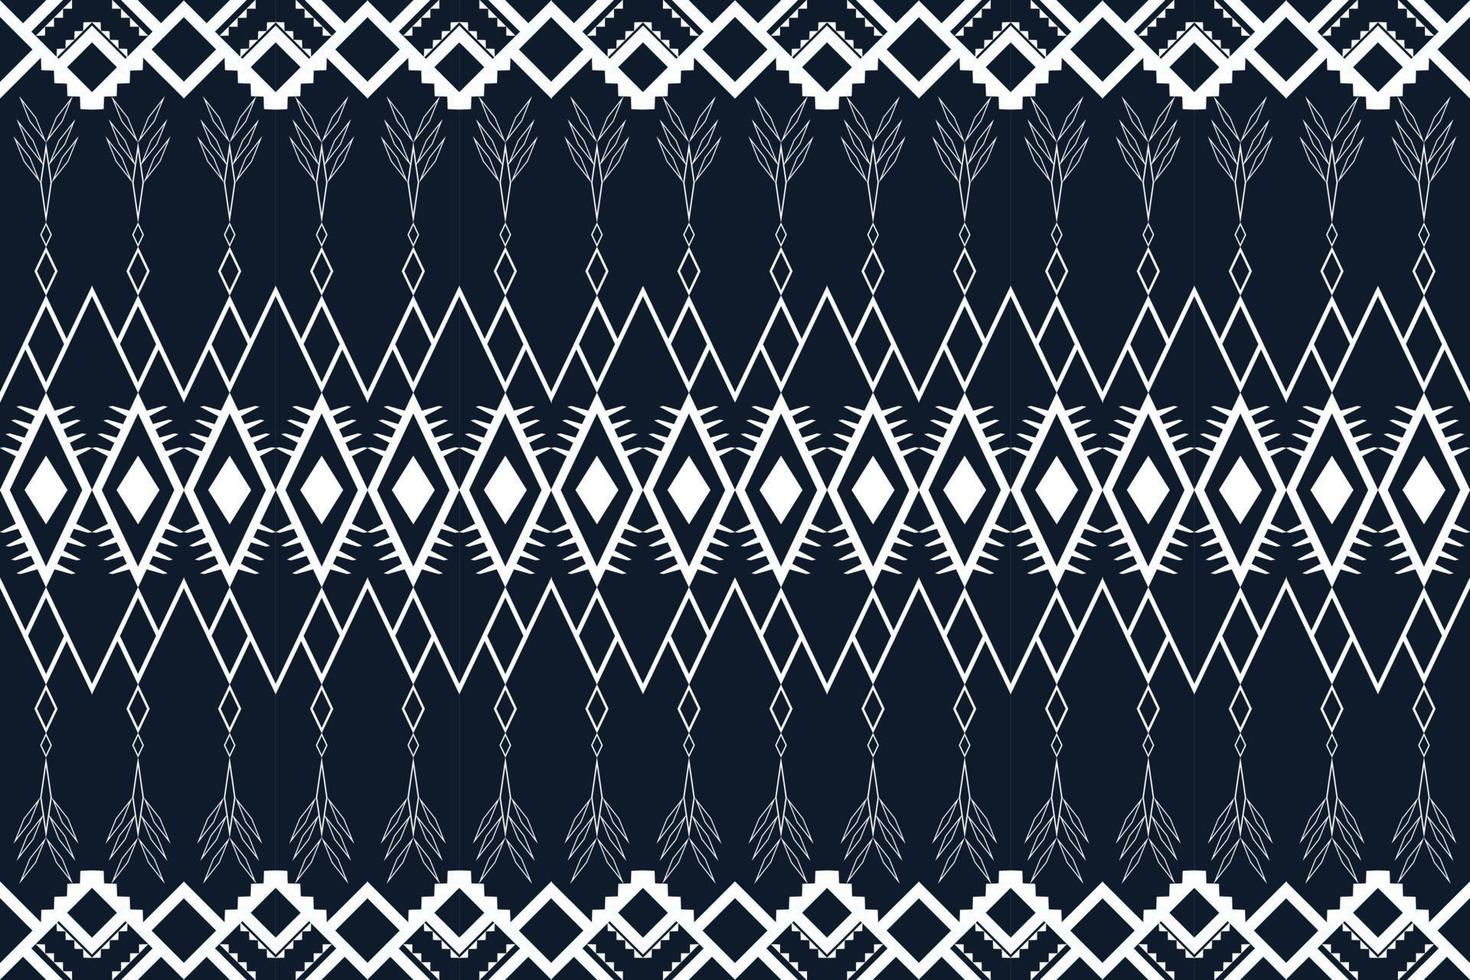 White and dark blue geometric ethnic seamless pattern design for wallpaper, background, fabric, curtain, carpet, clothing, and wrapping vector illustration.